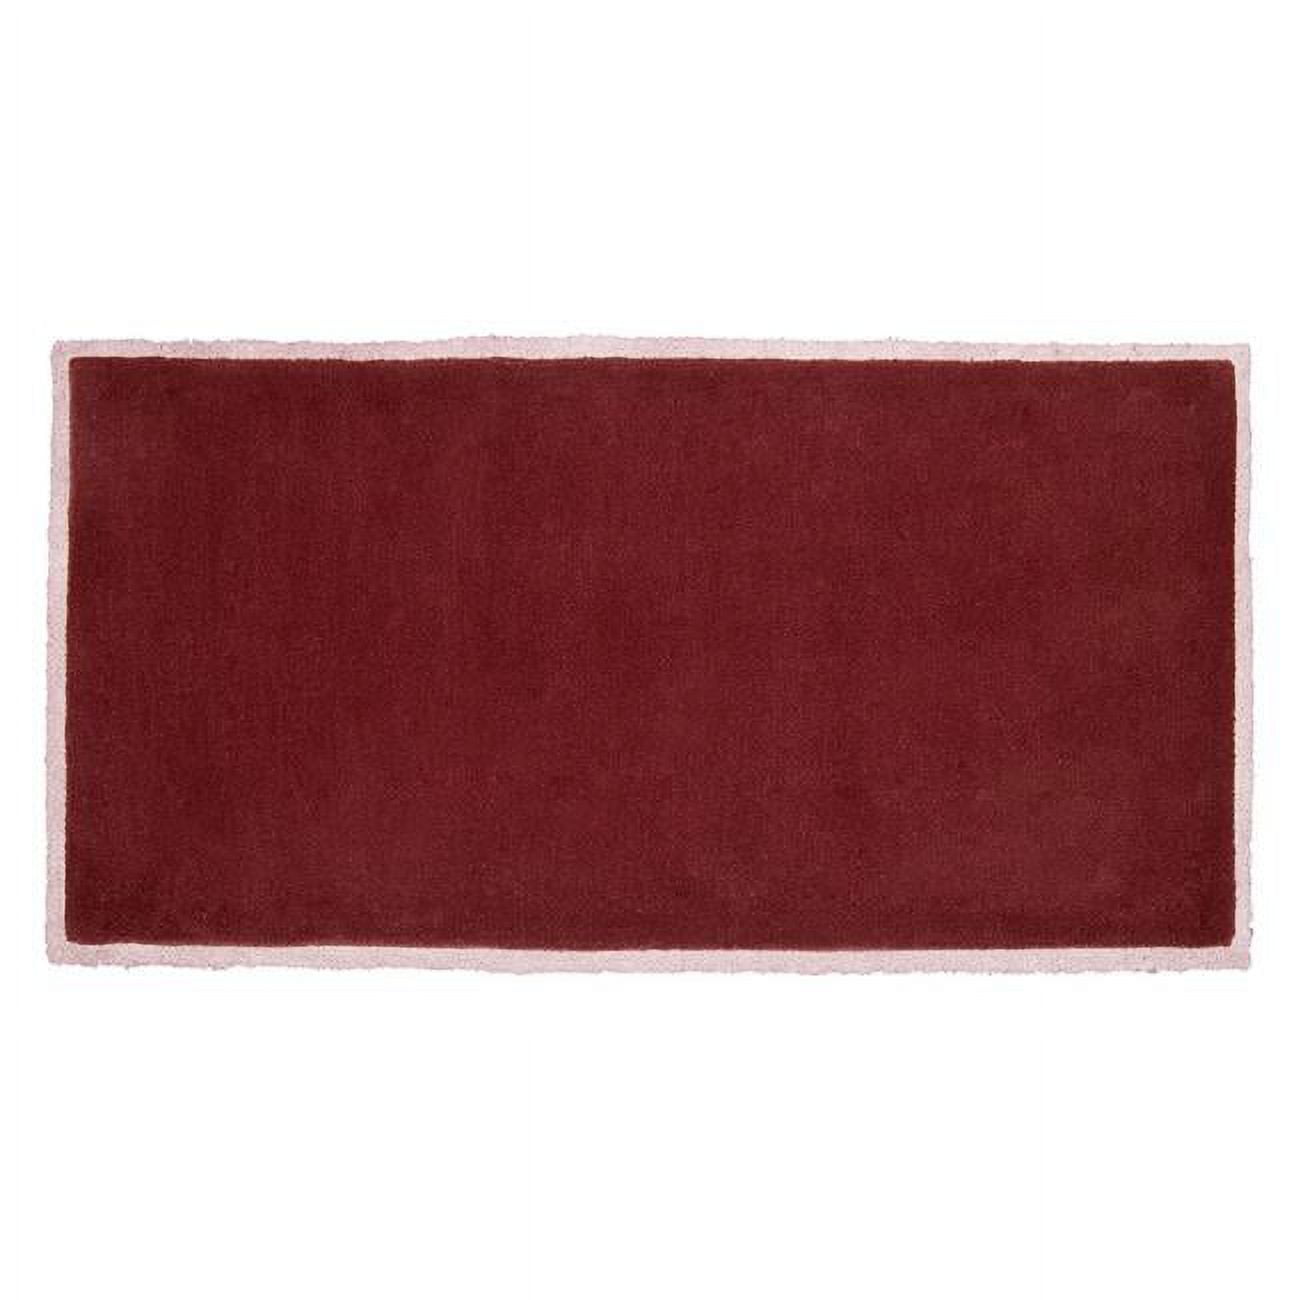 Picture of Achla H-55 44 x 22 in. Hearth Rectangular Rug - Plum Wine